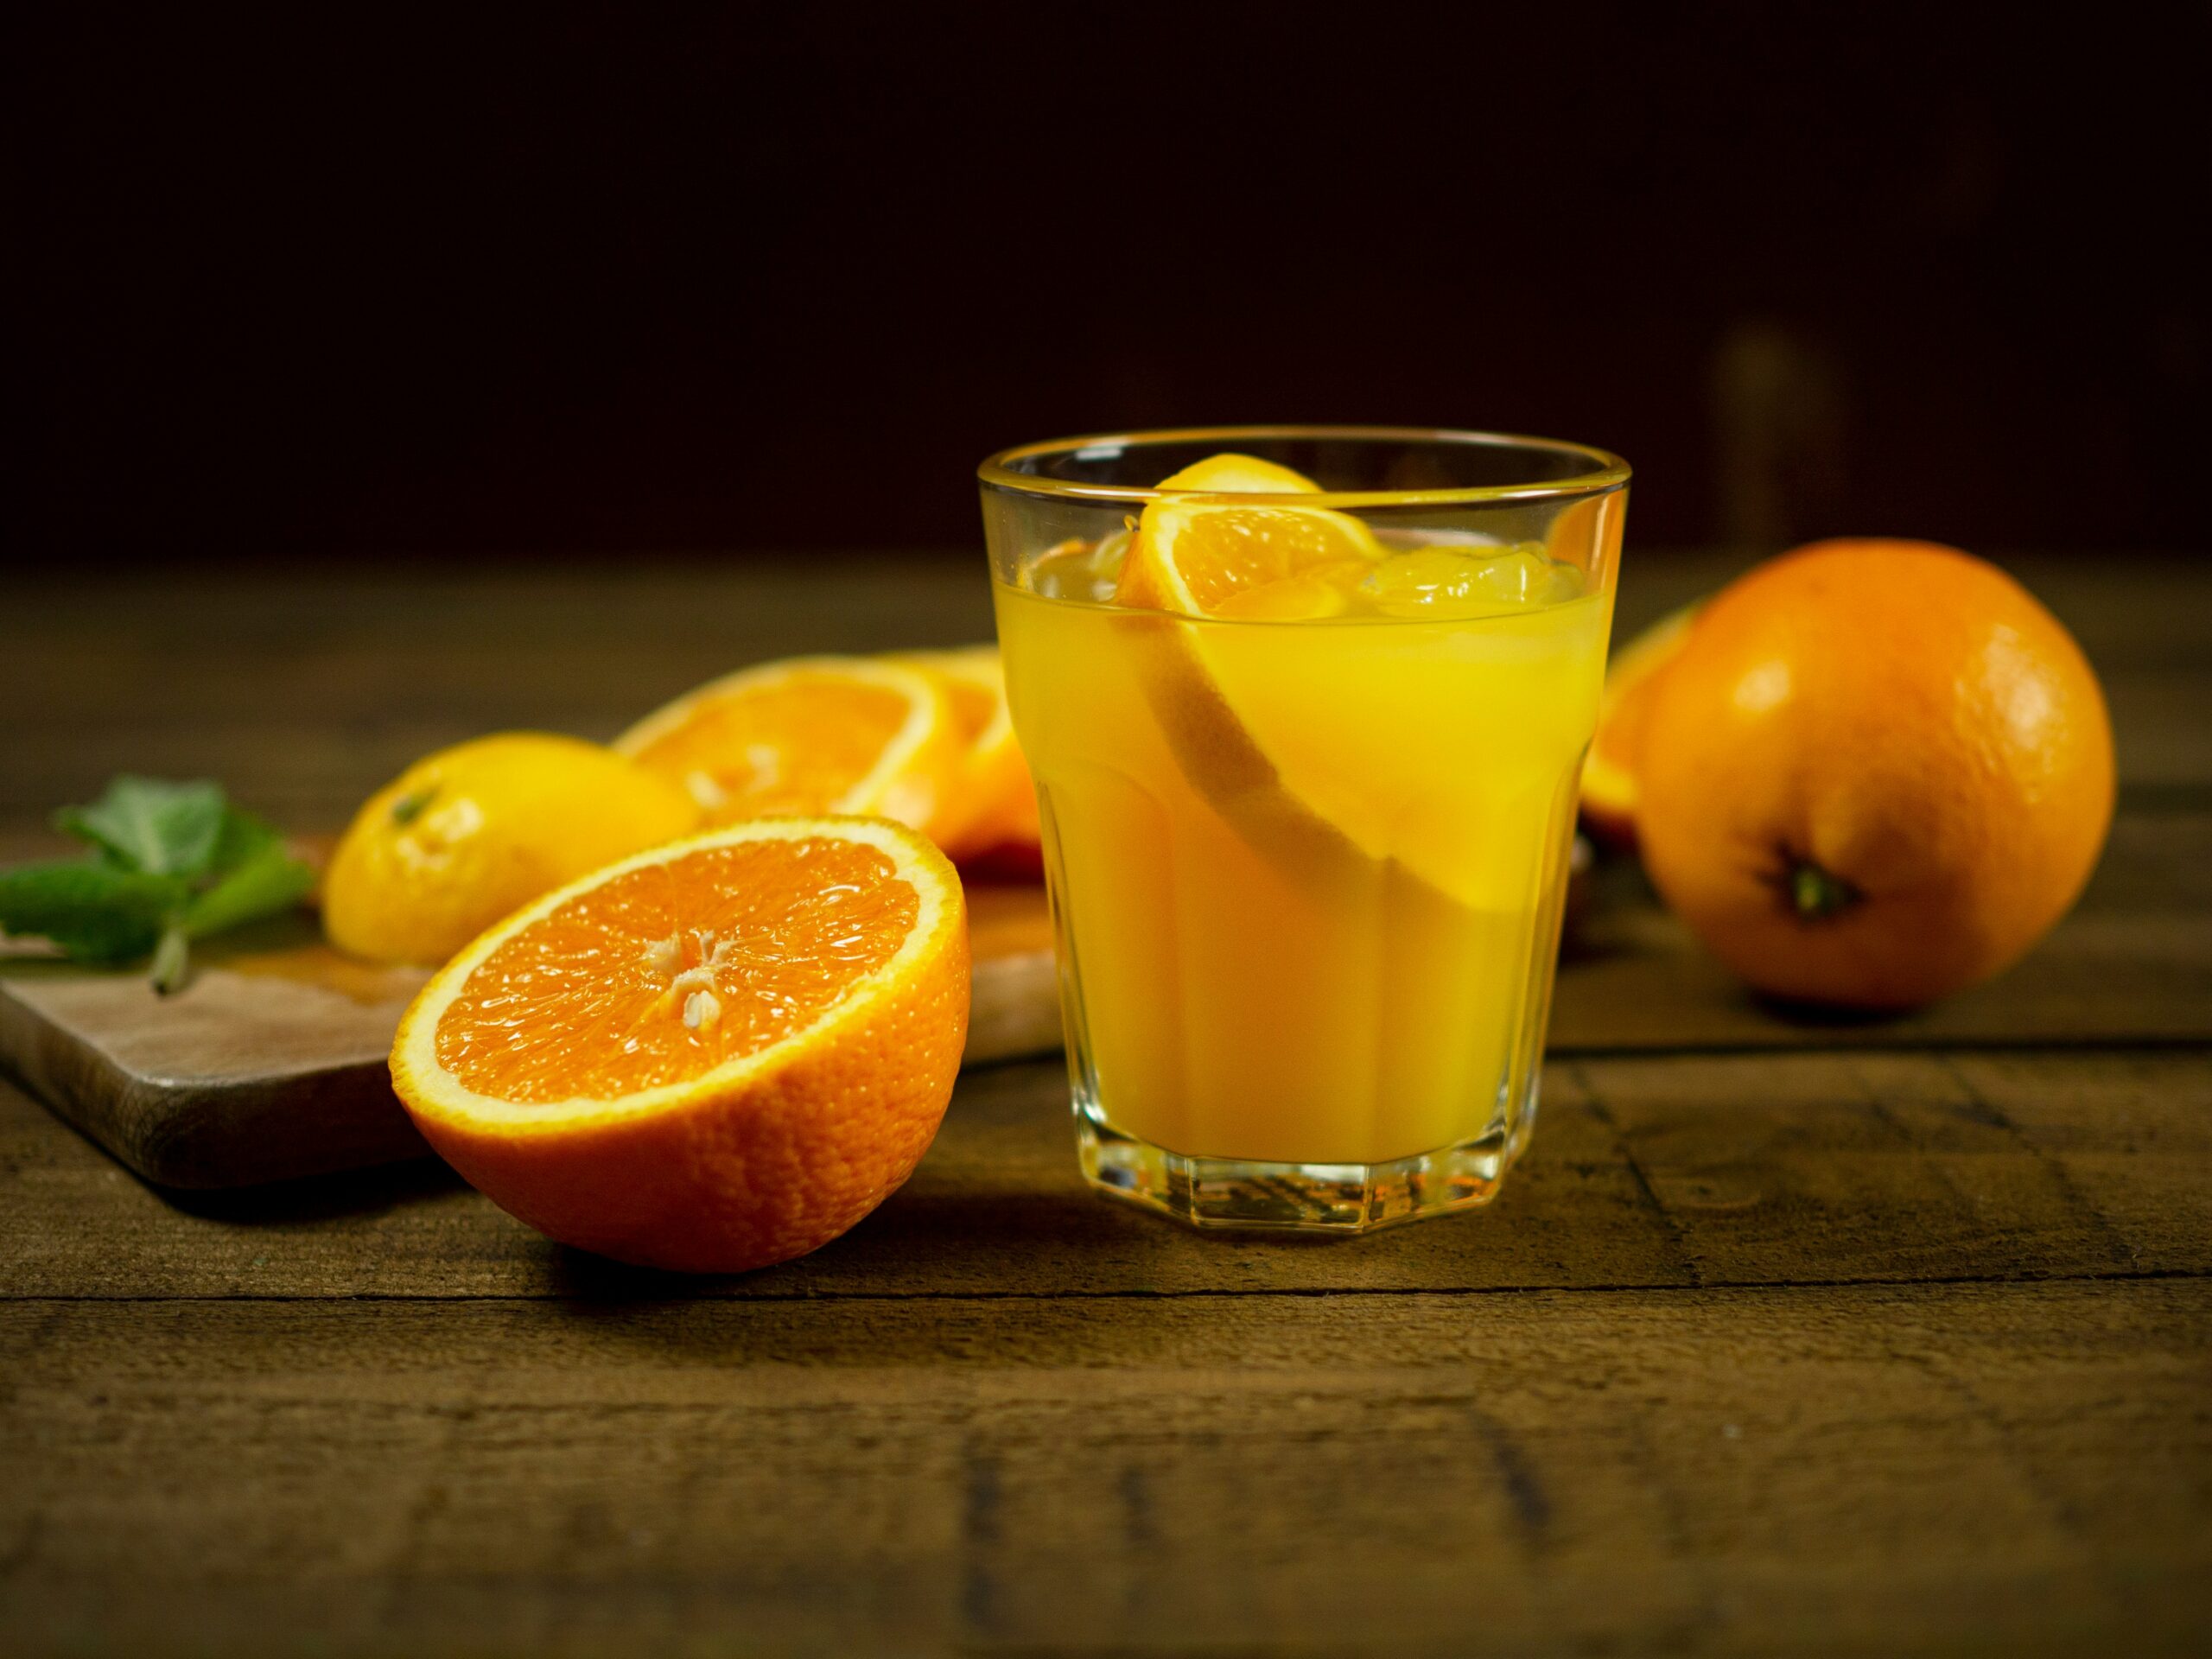 A tequila sunrise is one of the best tequila cocktails for brunch. Pictured: Orange juice